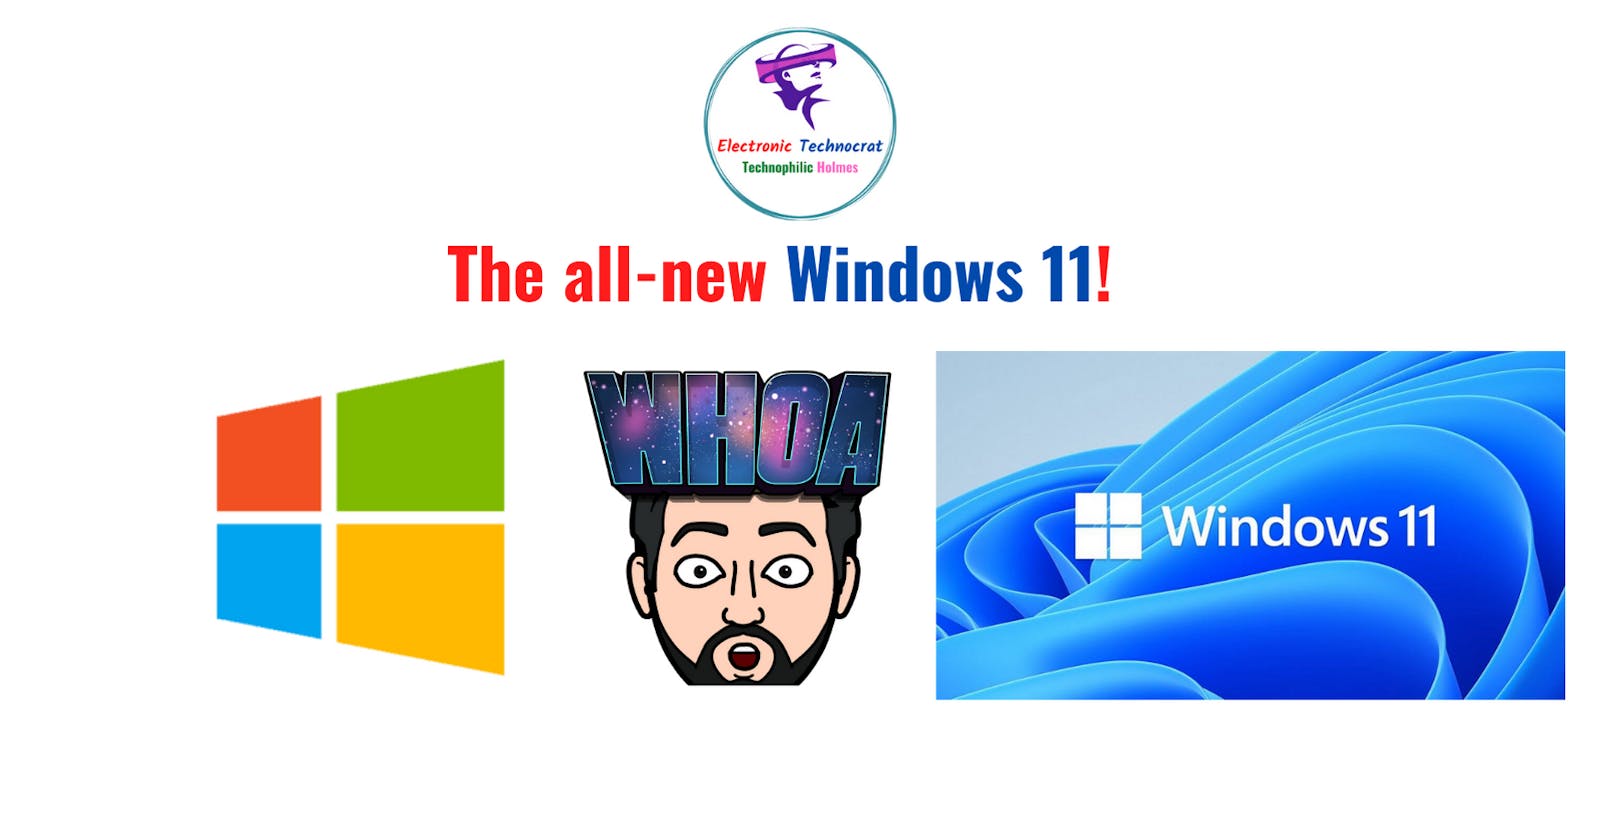 The all-new Windows 11!